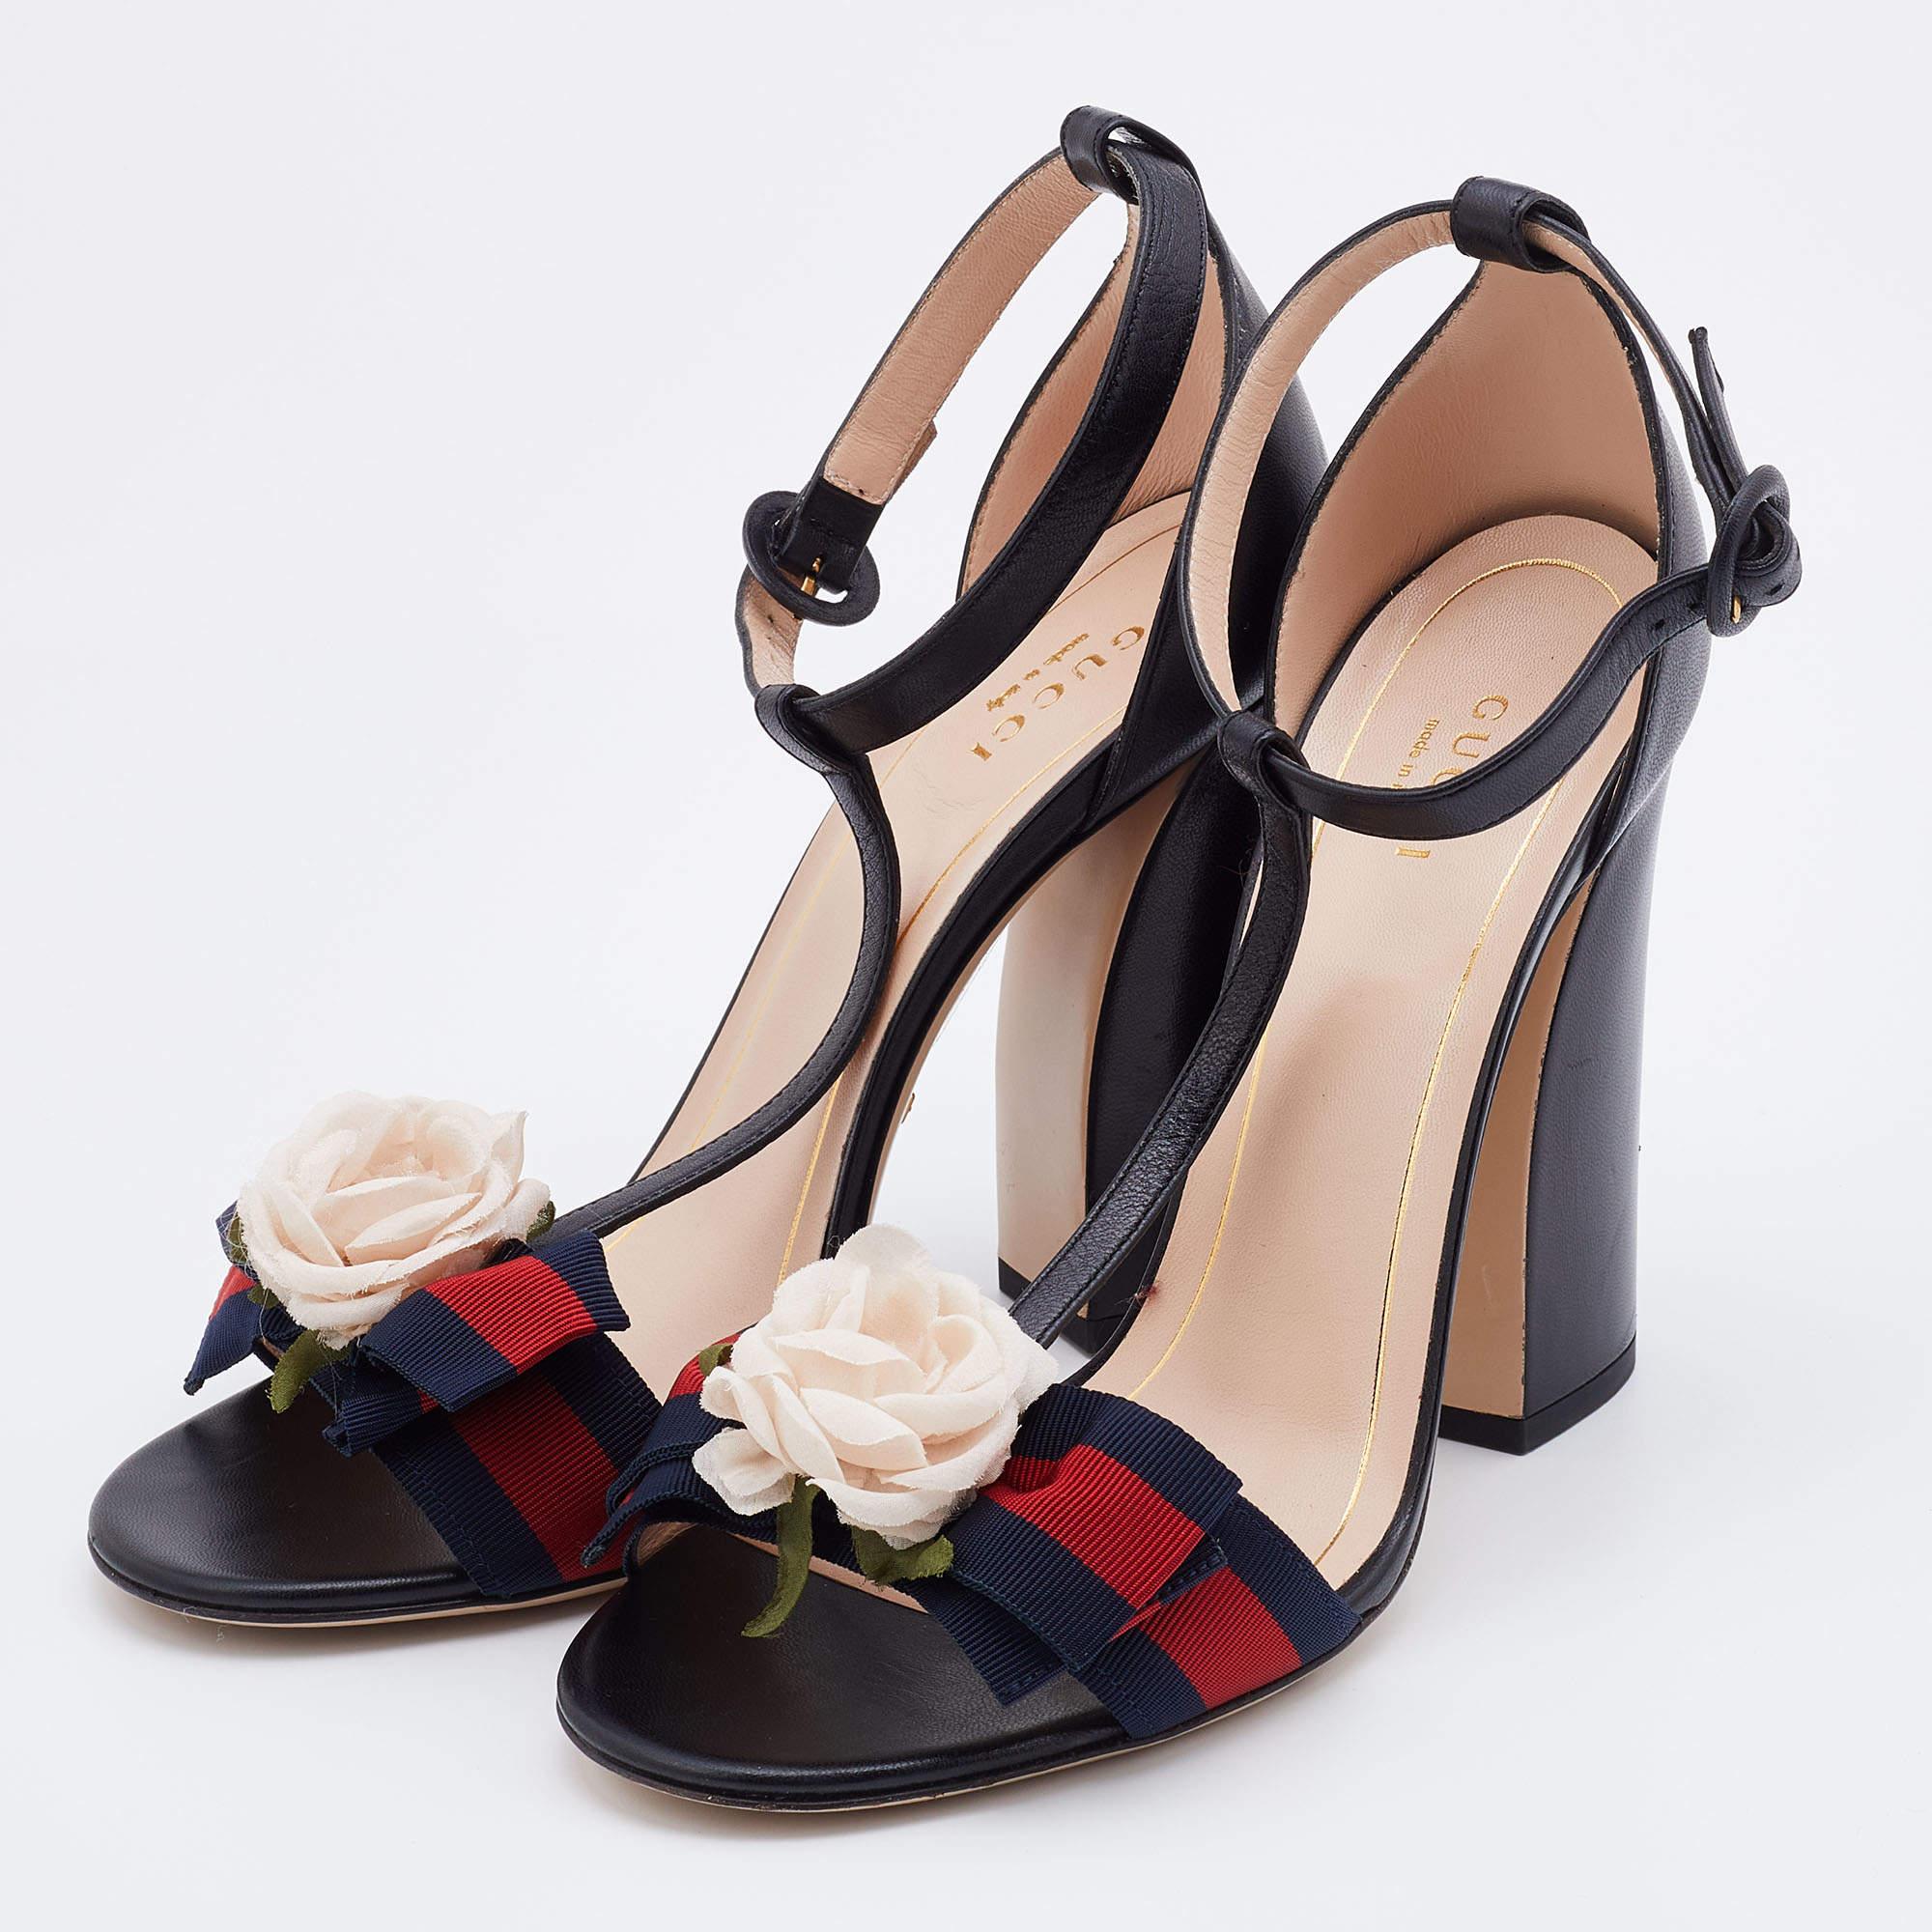 Gucci Black Leather and Web Bow Flower Ankle Strap Sandals Size 38.5 1